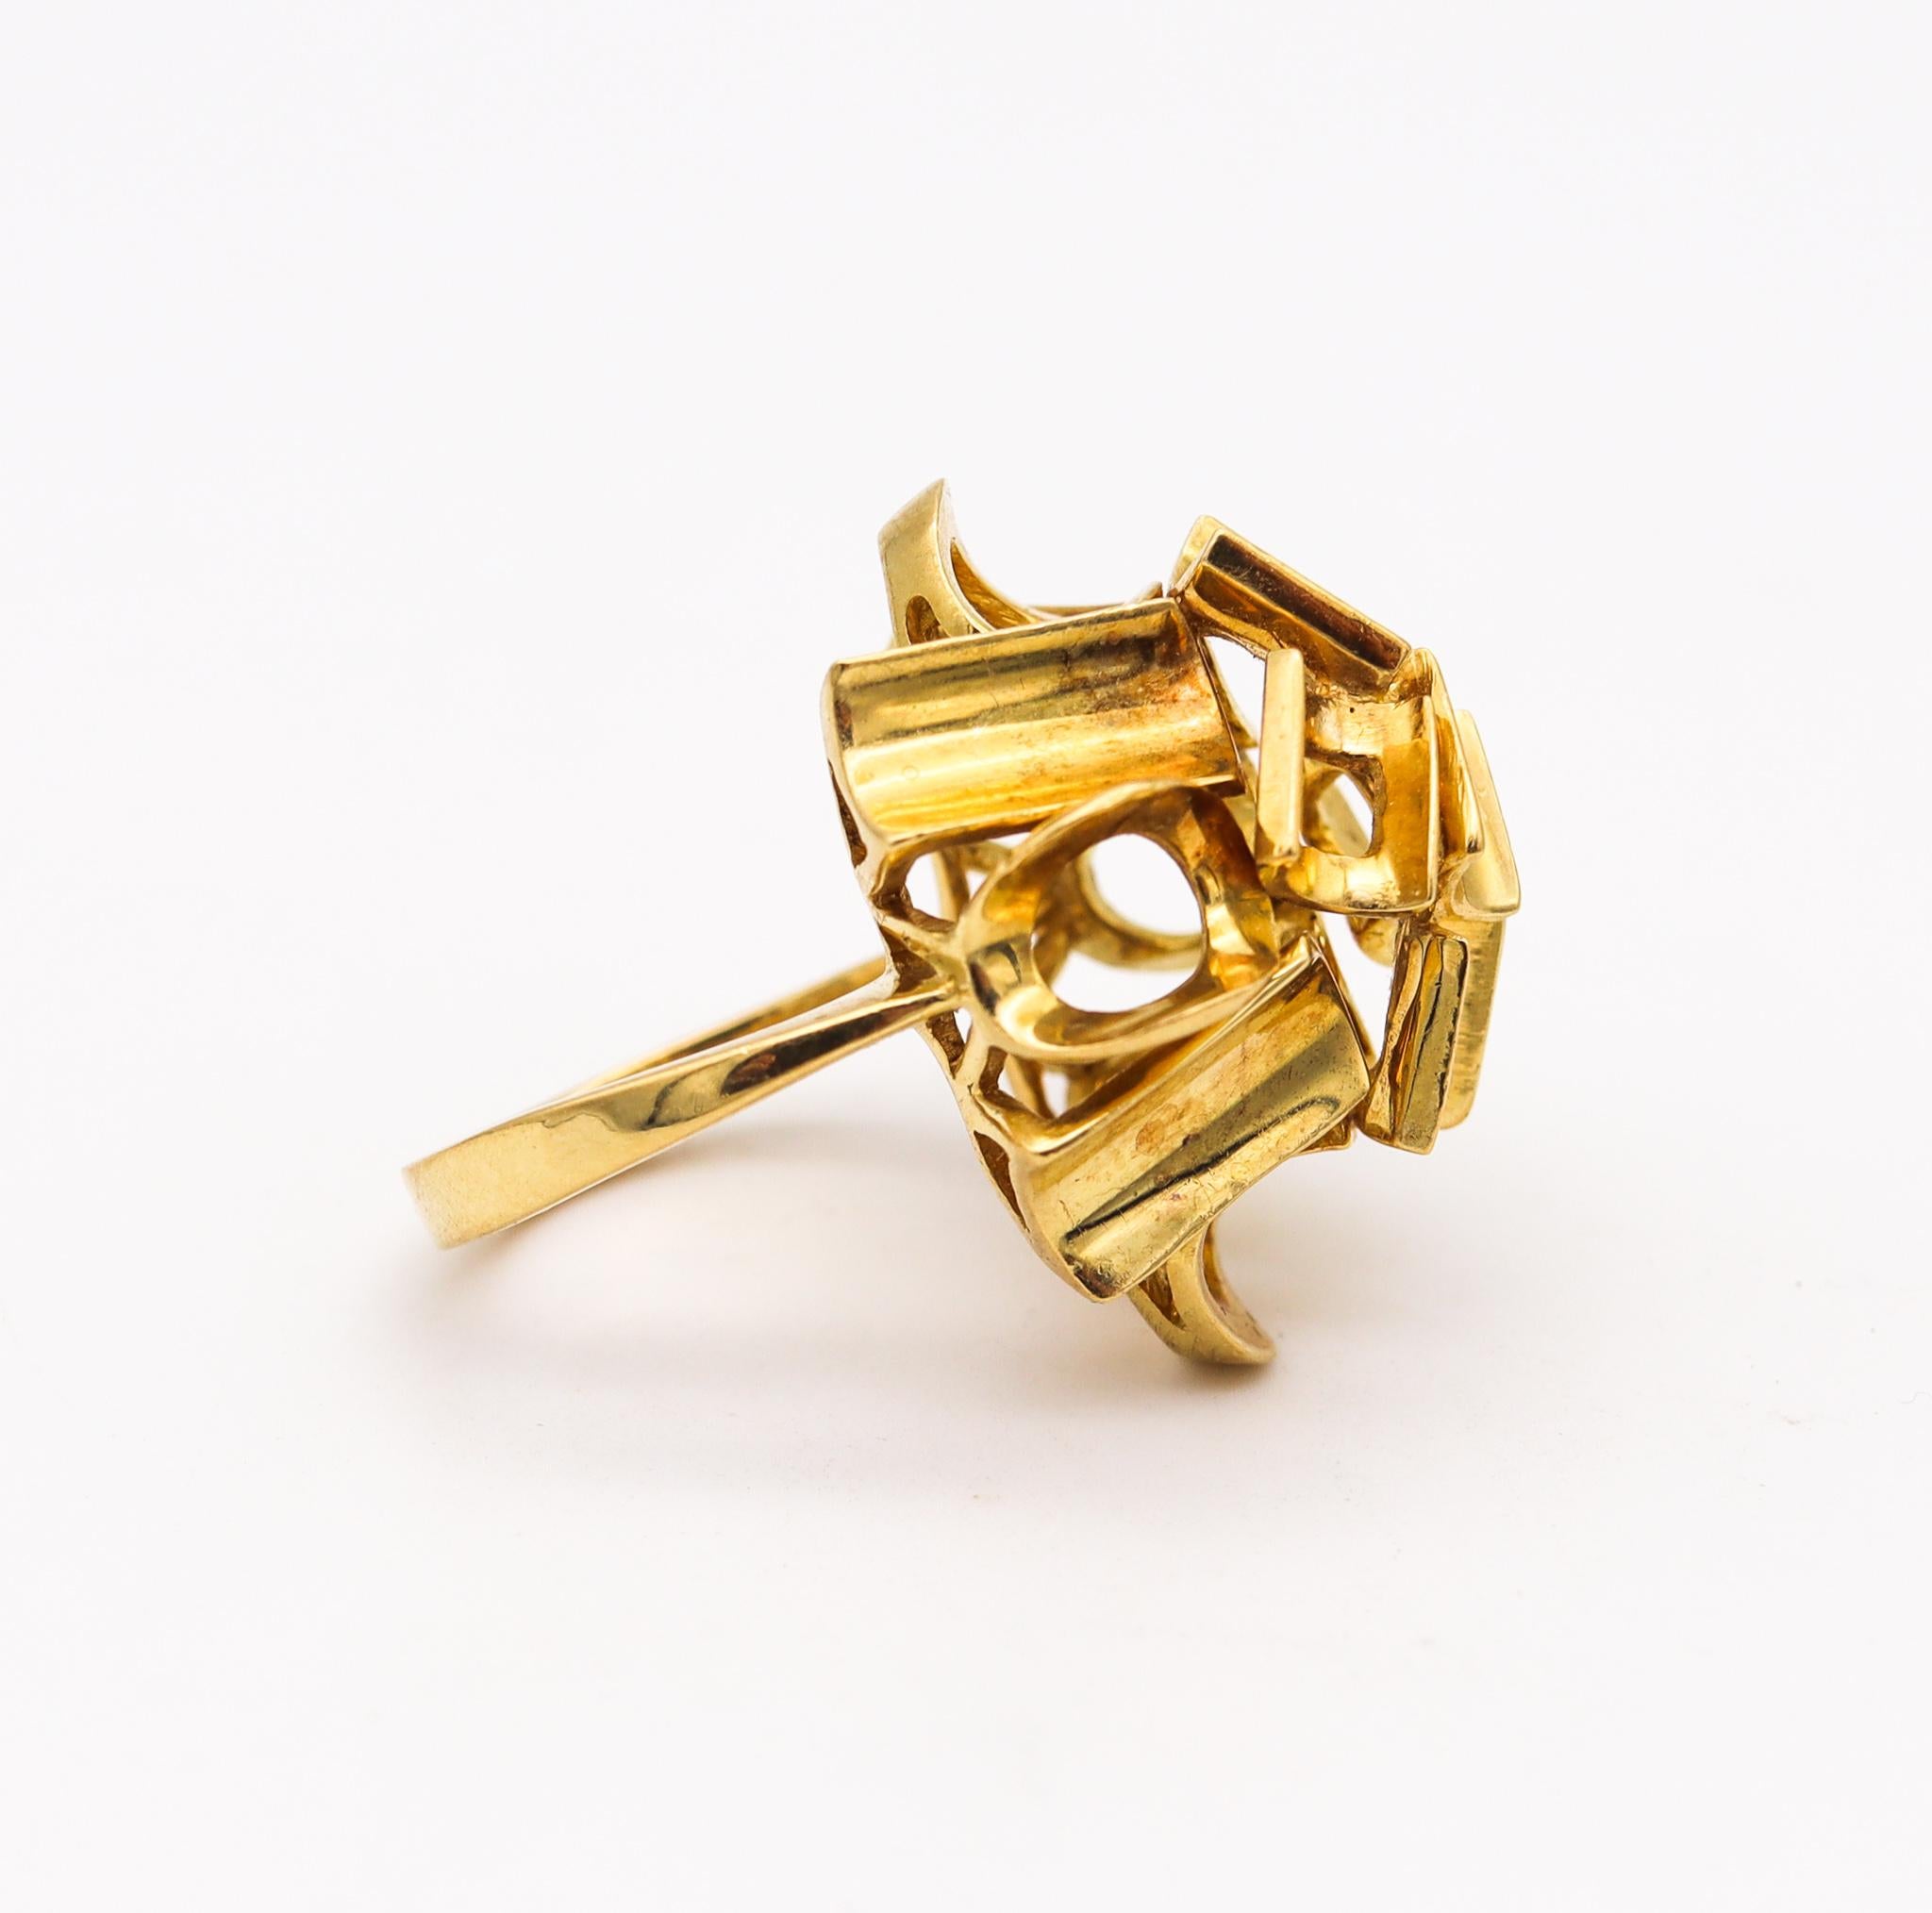 Modernist Brutalist 1970's Sculptural Geometric Cocktail Ring In Solid 18Kt Yellow Gold For Sale